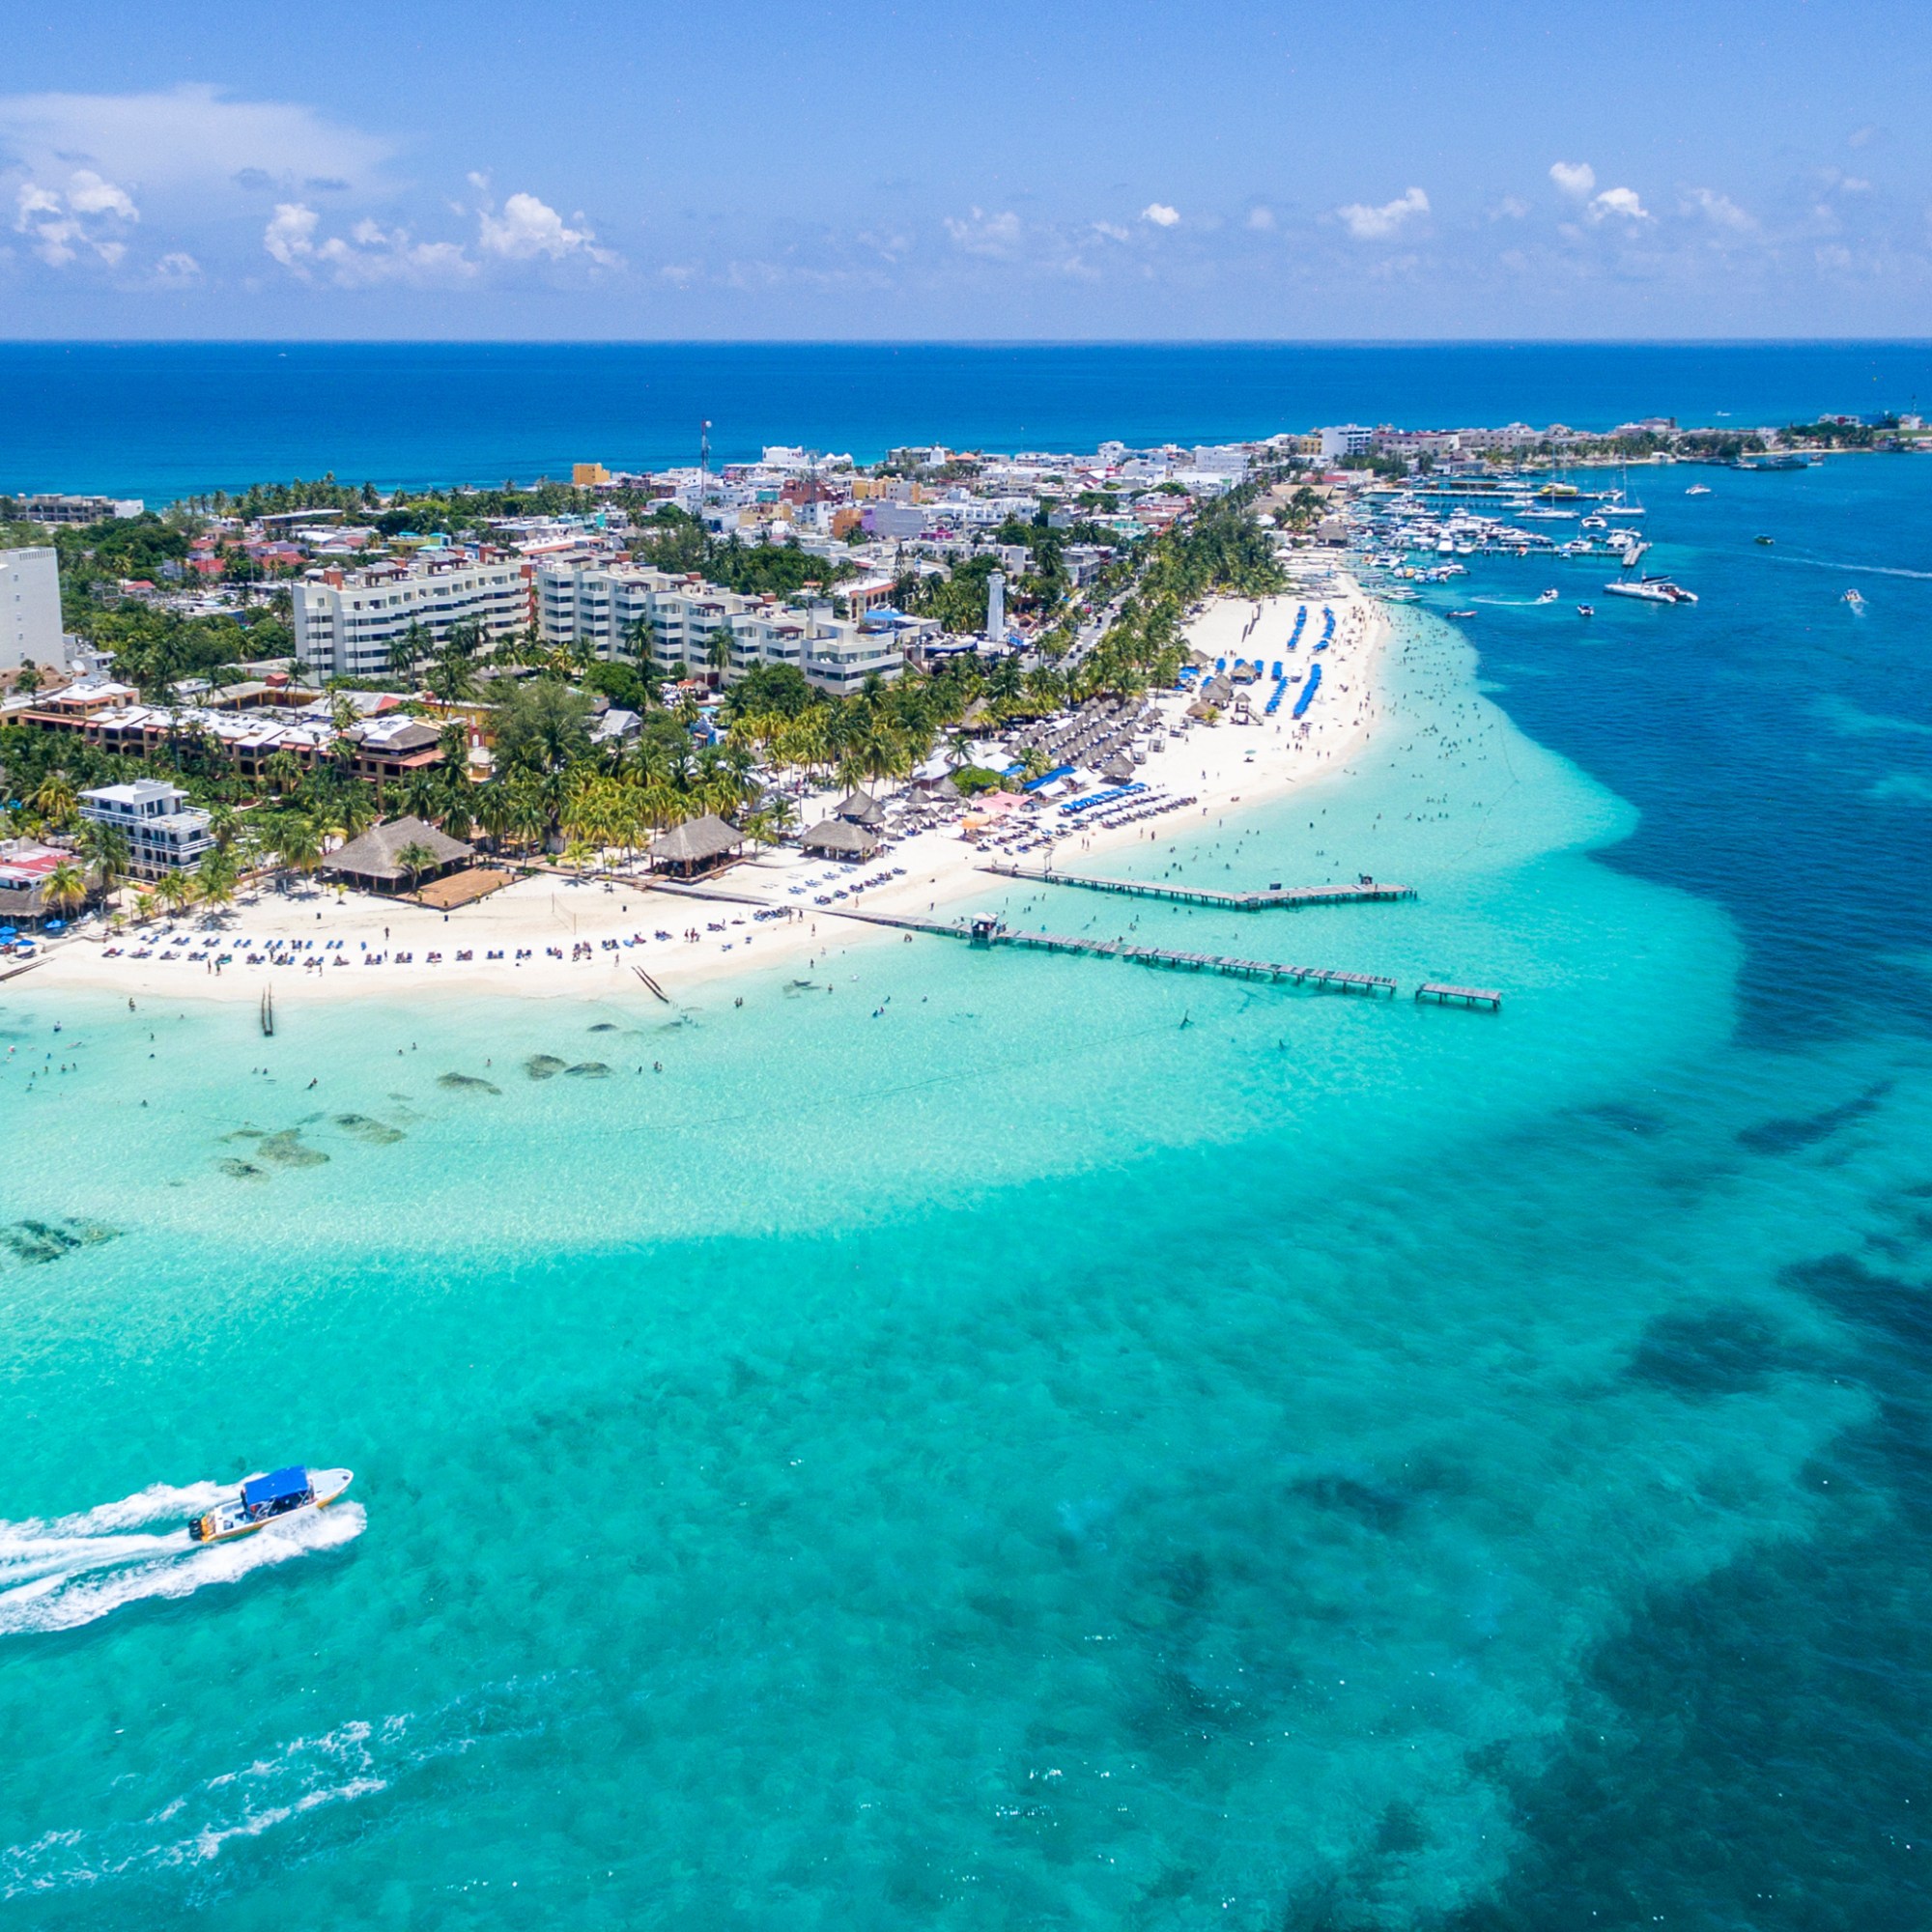 Aerial view of Isla Mujeres near Cancun, Mexico.